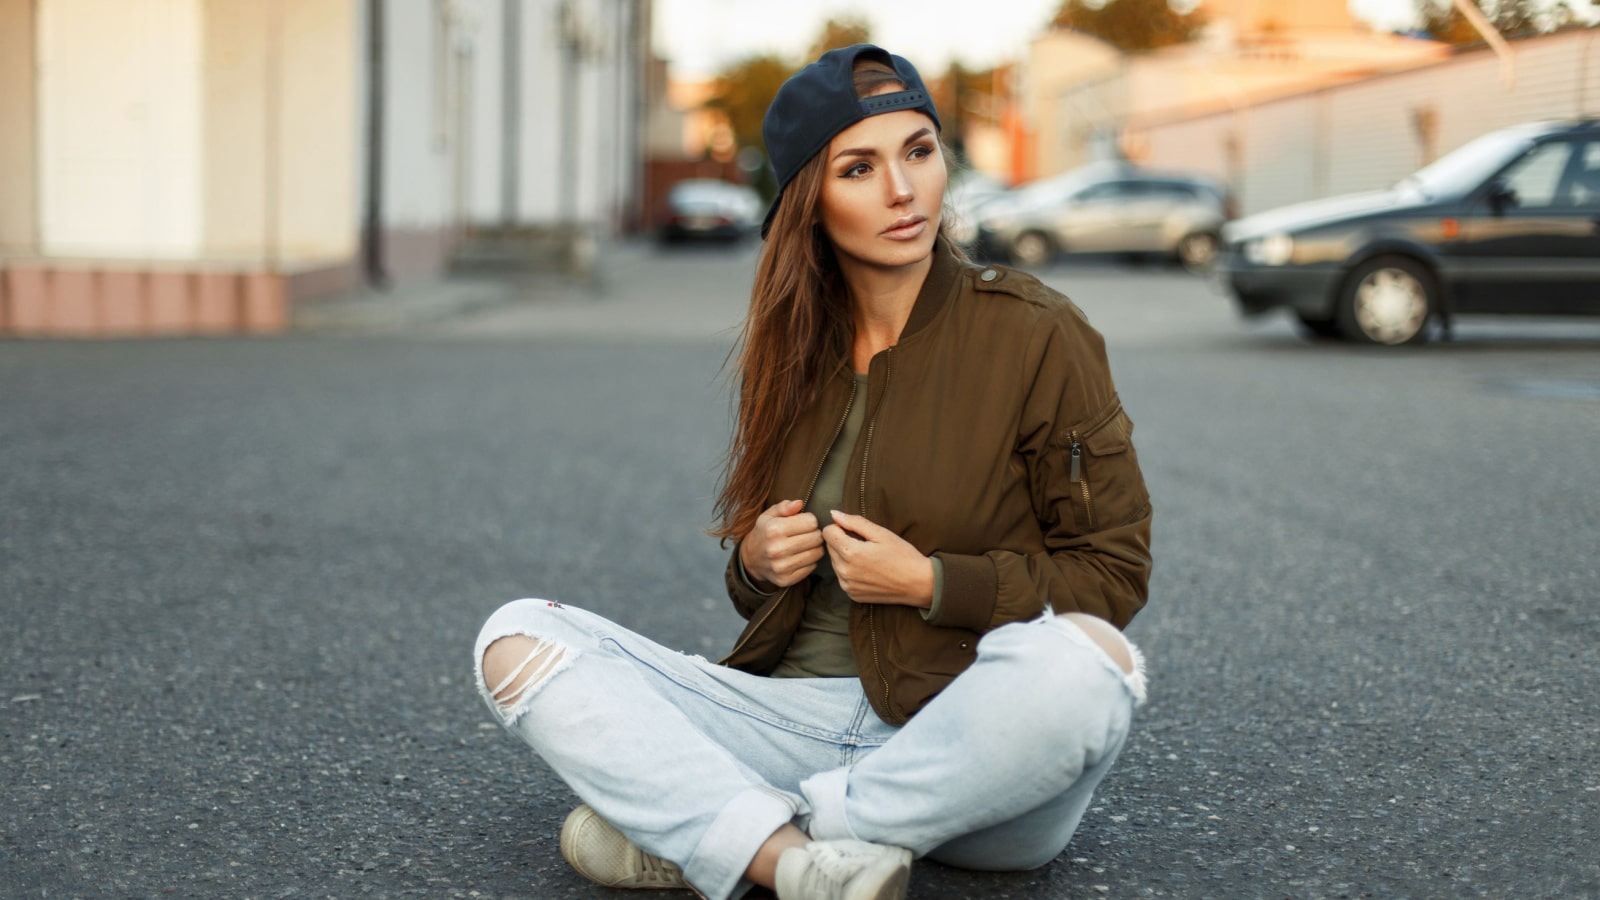 Beautiful young woman with freckles in a fashionable jacket and blue ragged jeans sits on the asphalt